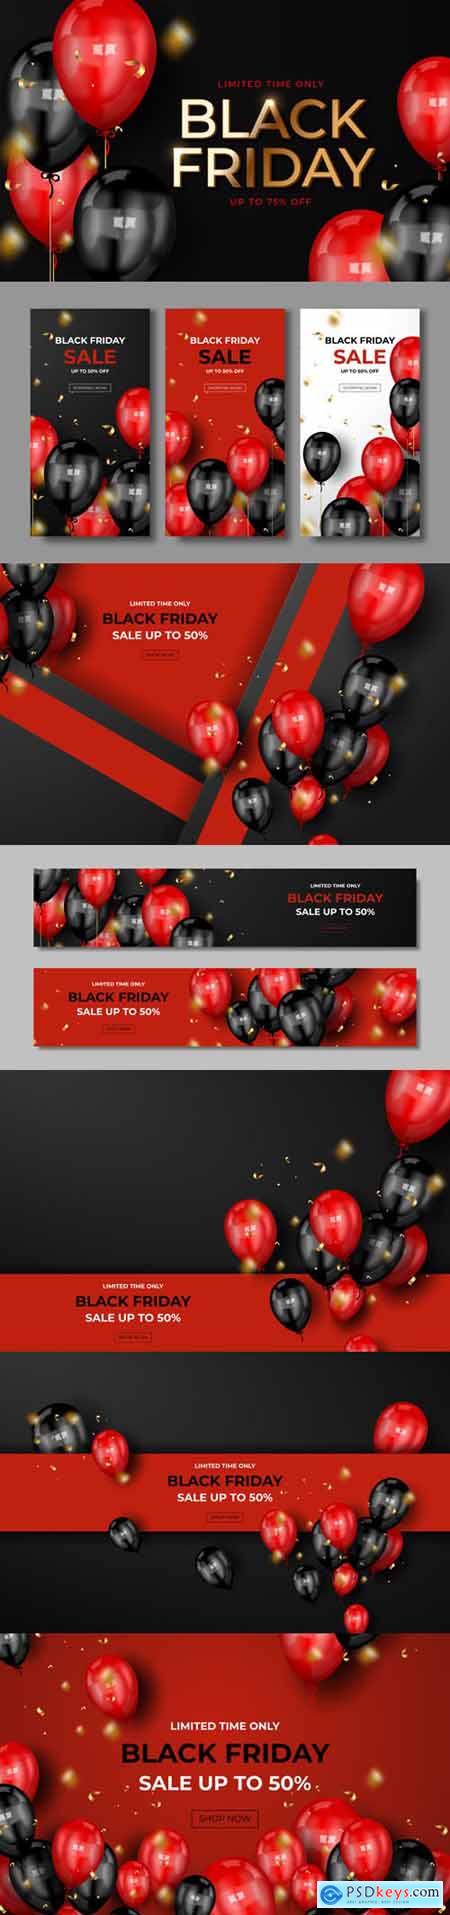 Black Friday Sale Banners & Backgrounds Vector Design Collection